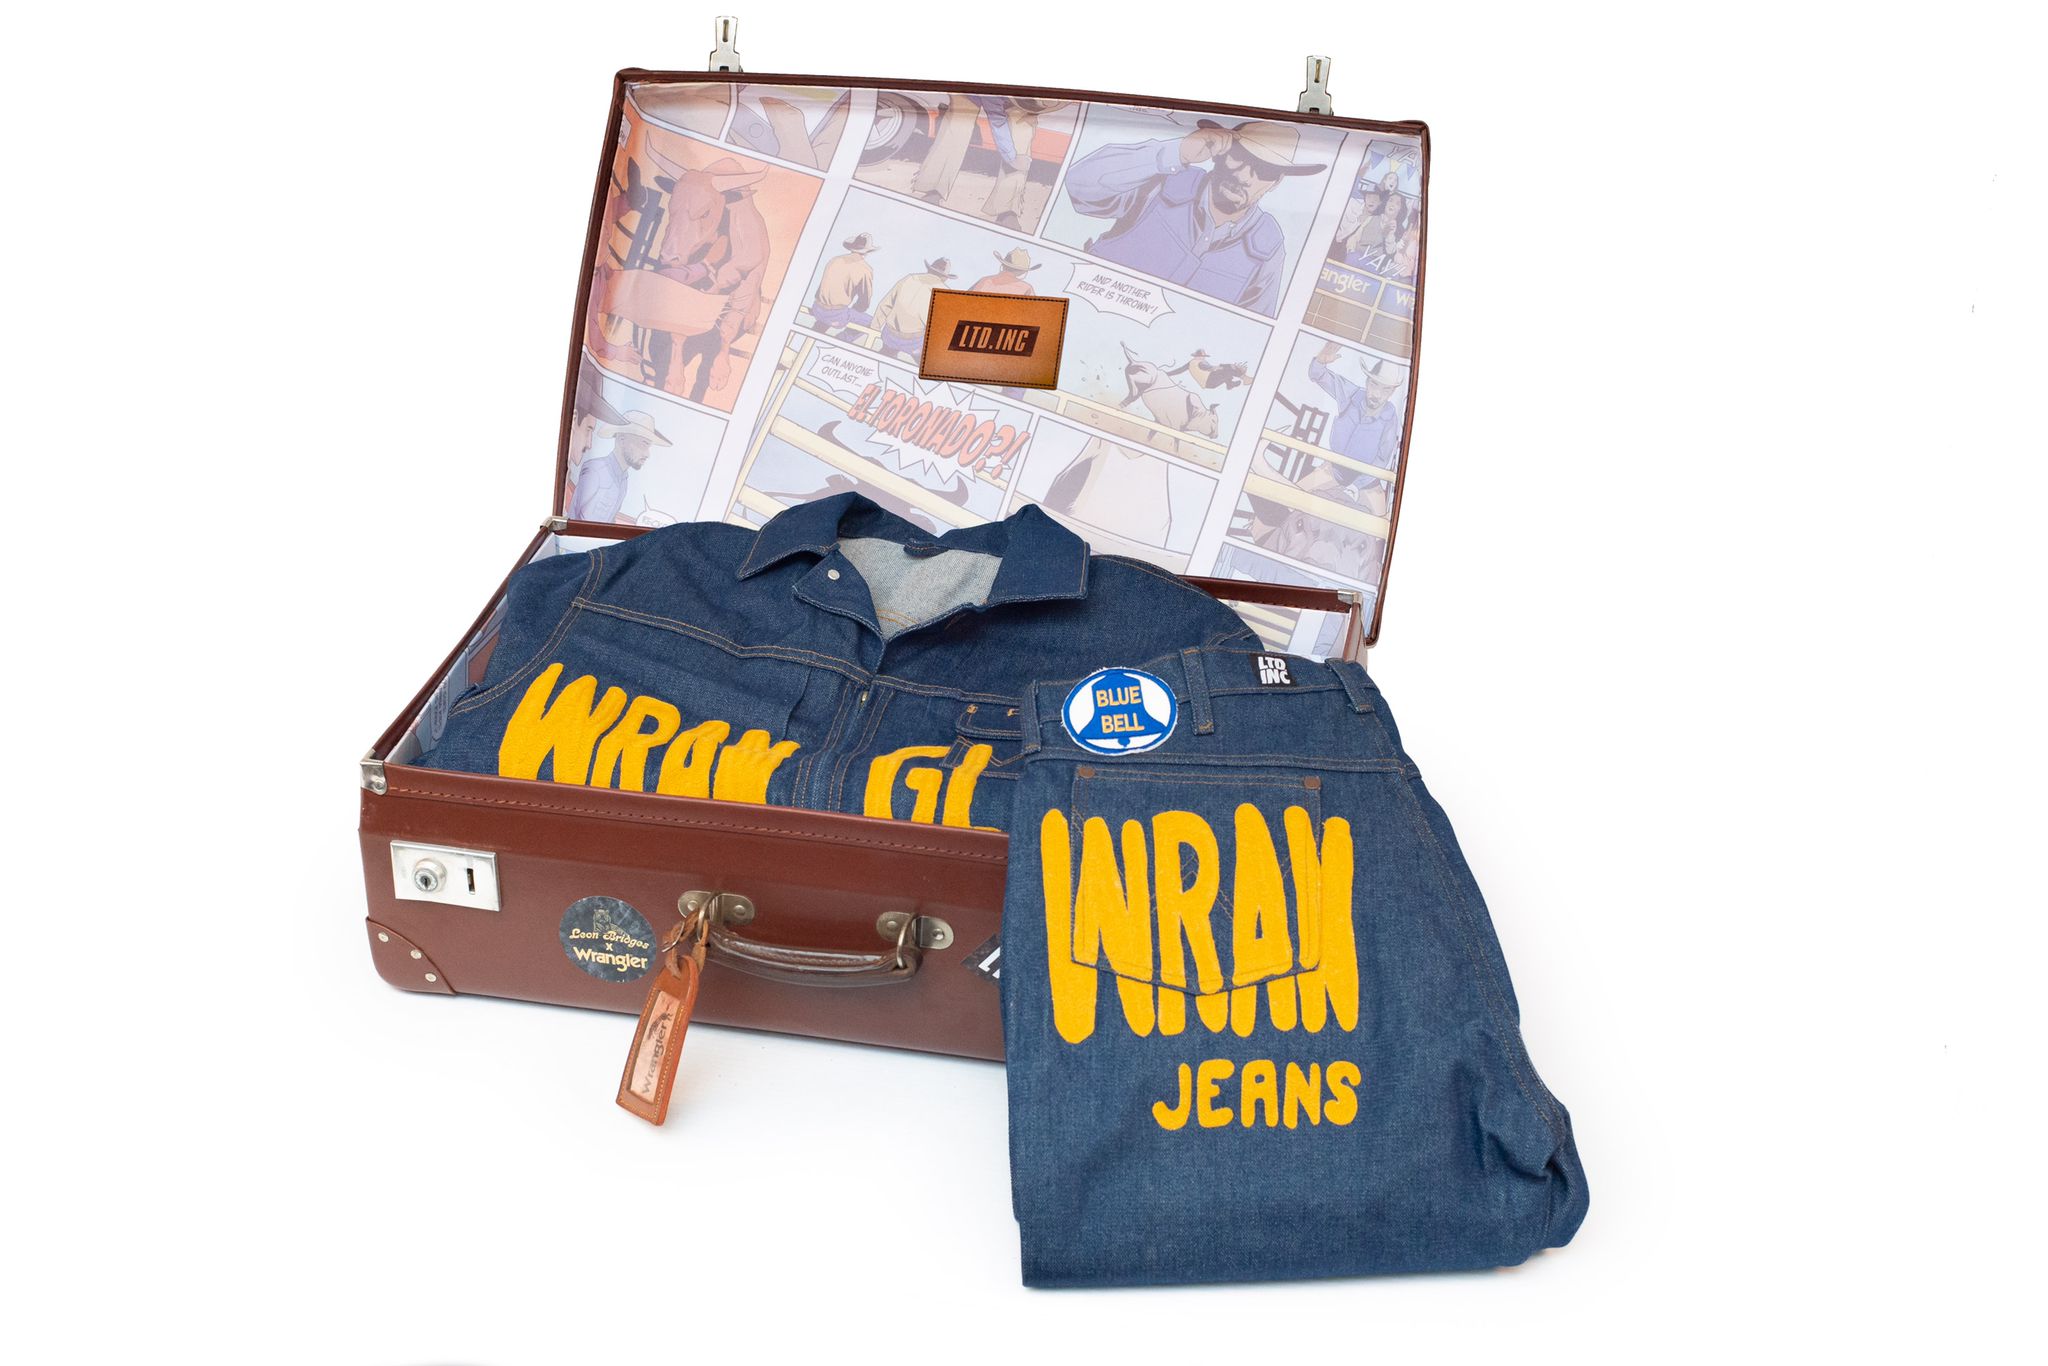 Image of Wrangler suit in a brown suitcase